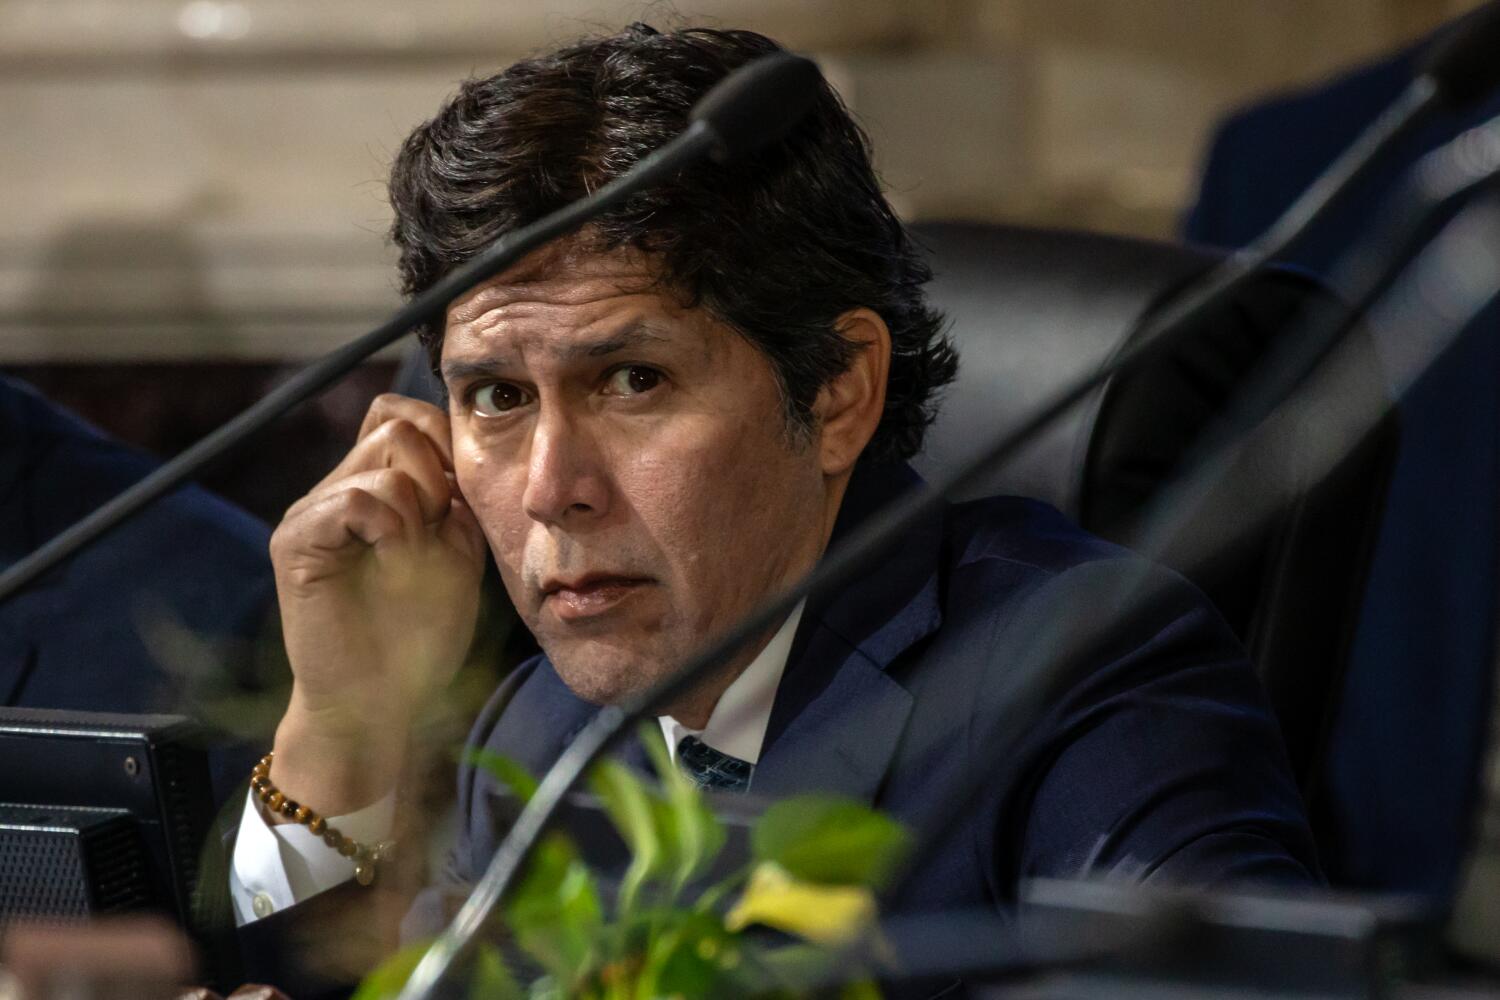 Councilmember Kevin de León, a year after racist audio scandal, says he'll run again